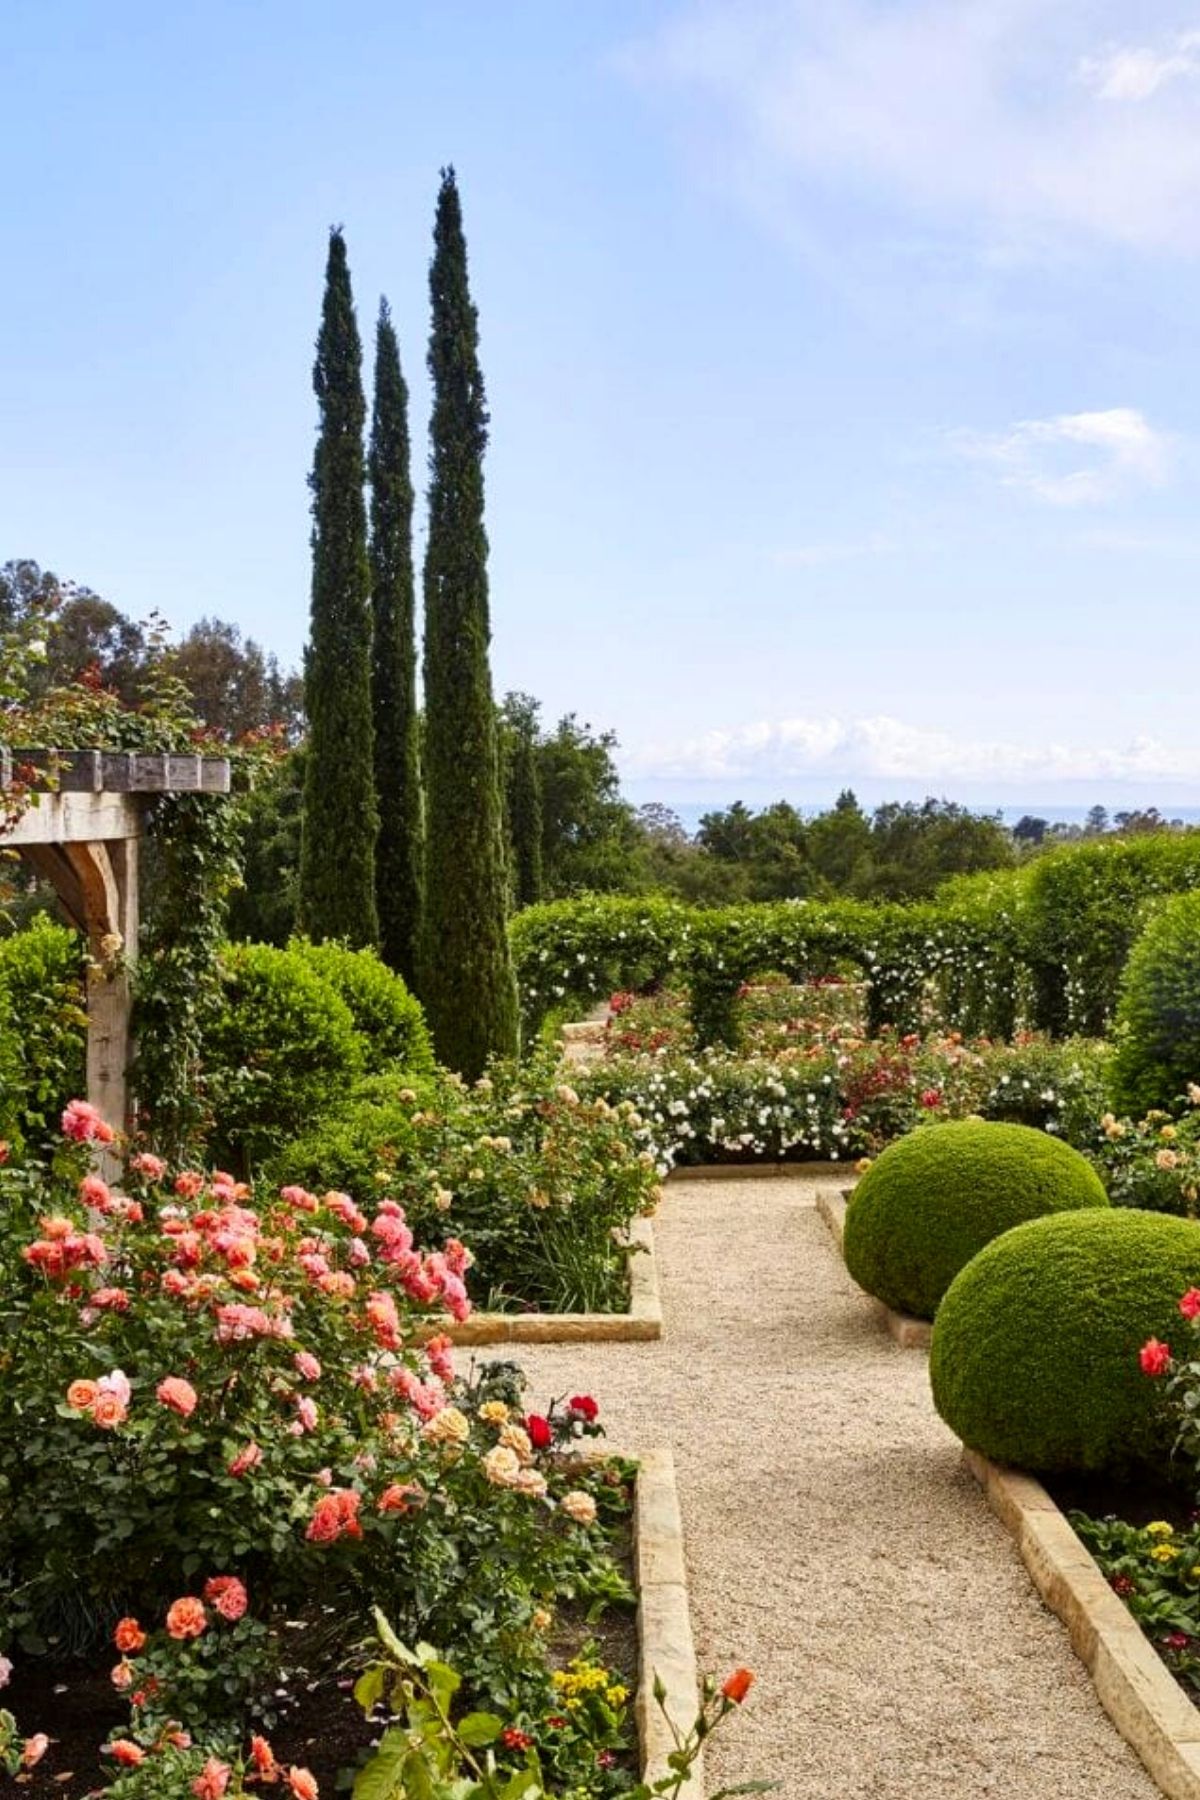 Oprah’s Rose Garden Was The Perfect Backdrop For Her Interview With Adele - Article on Thursd - Photo Veranda (1)